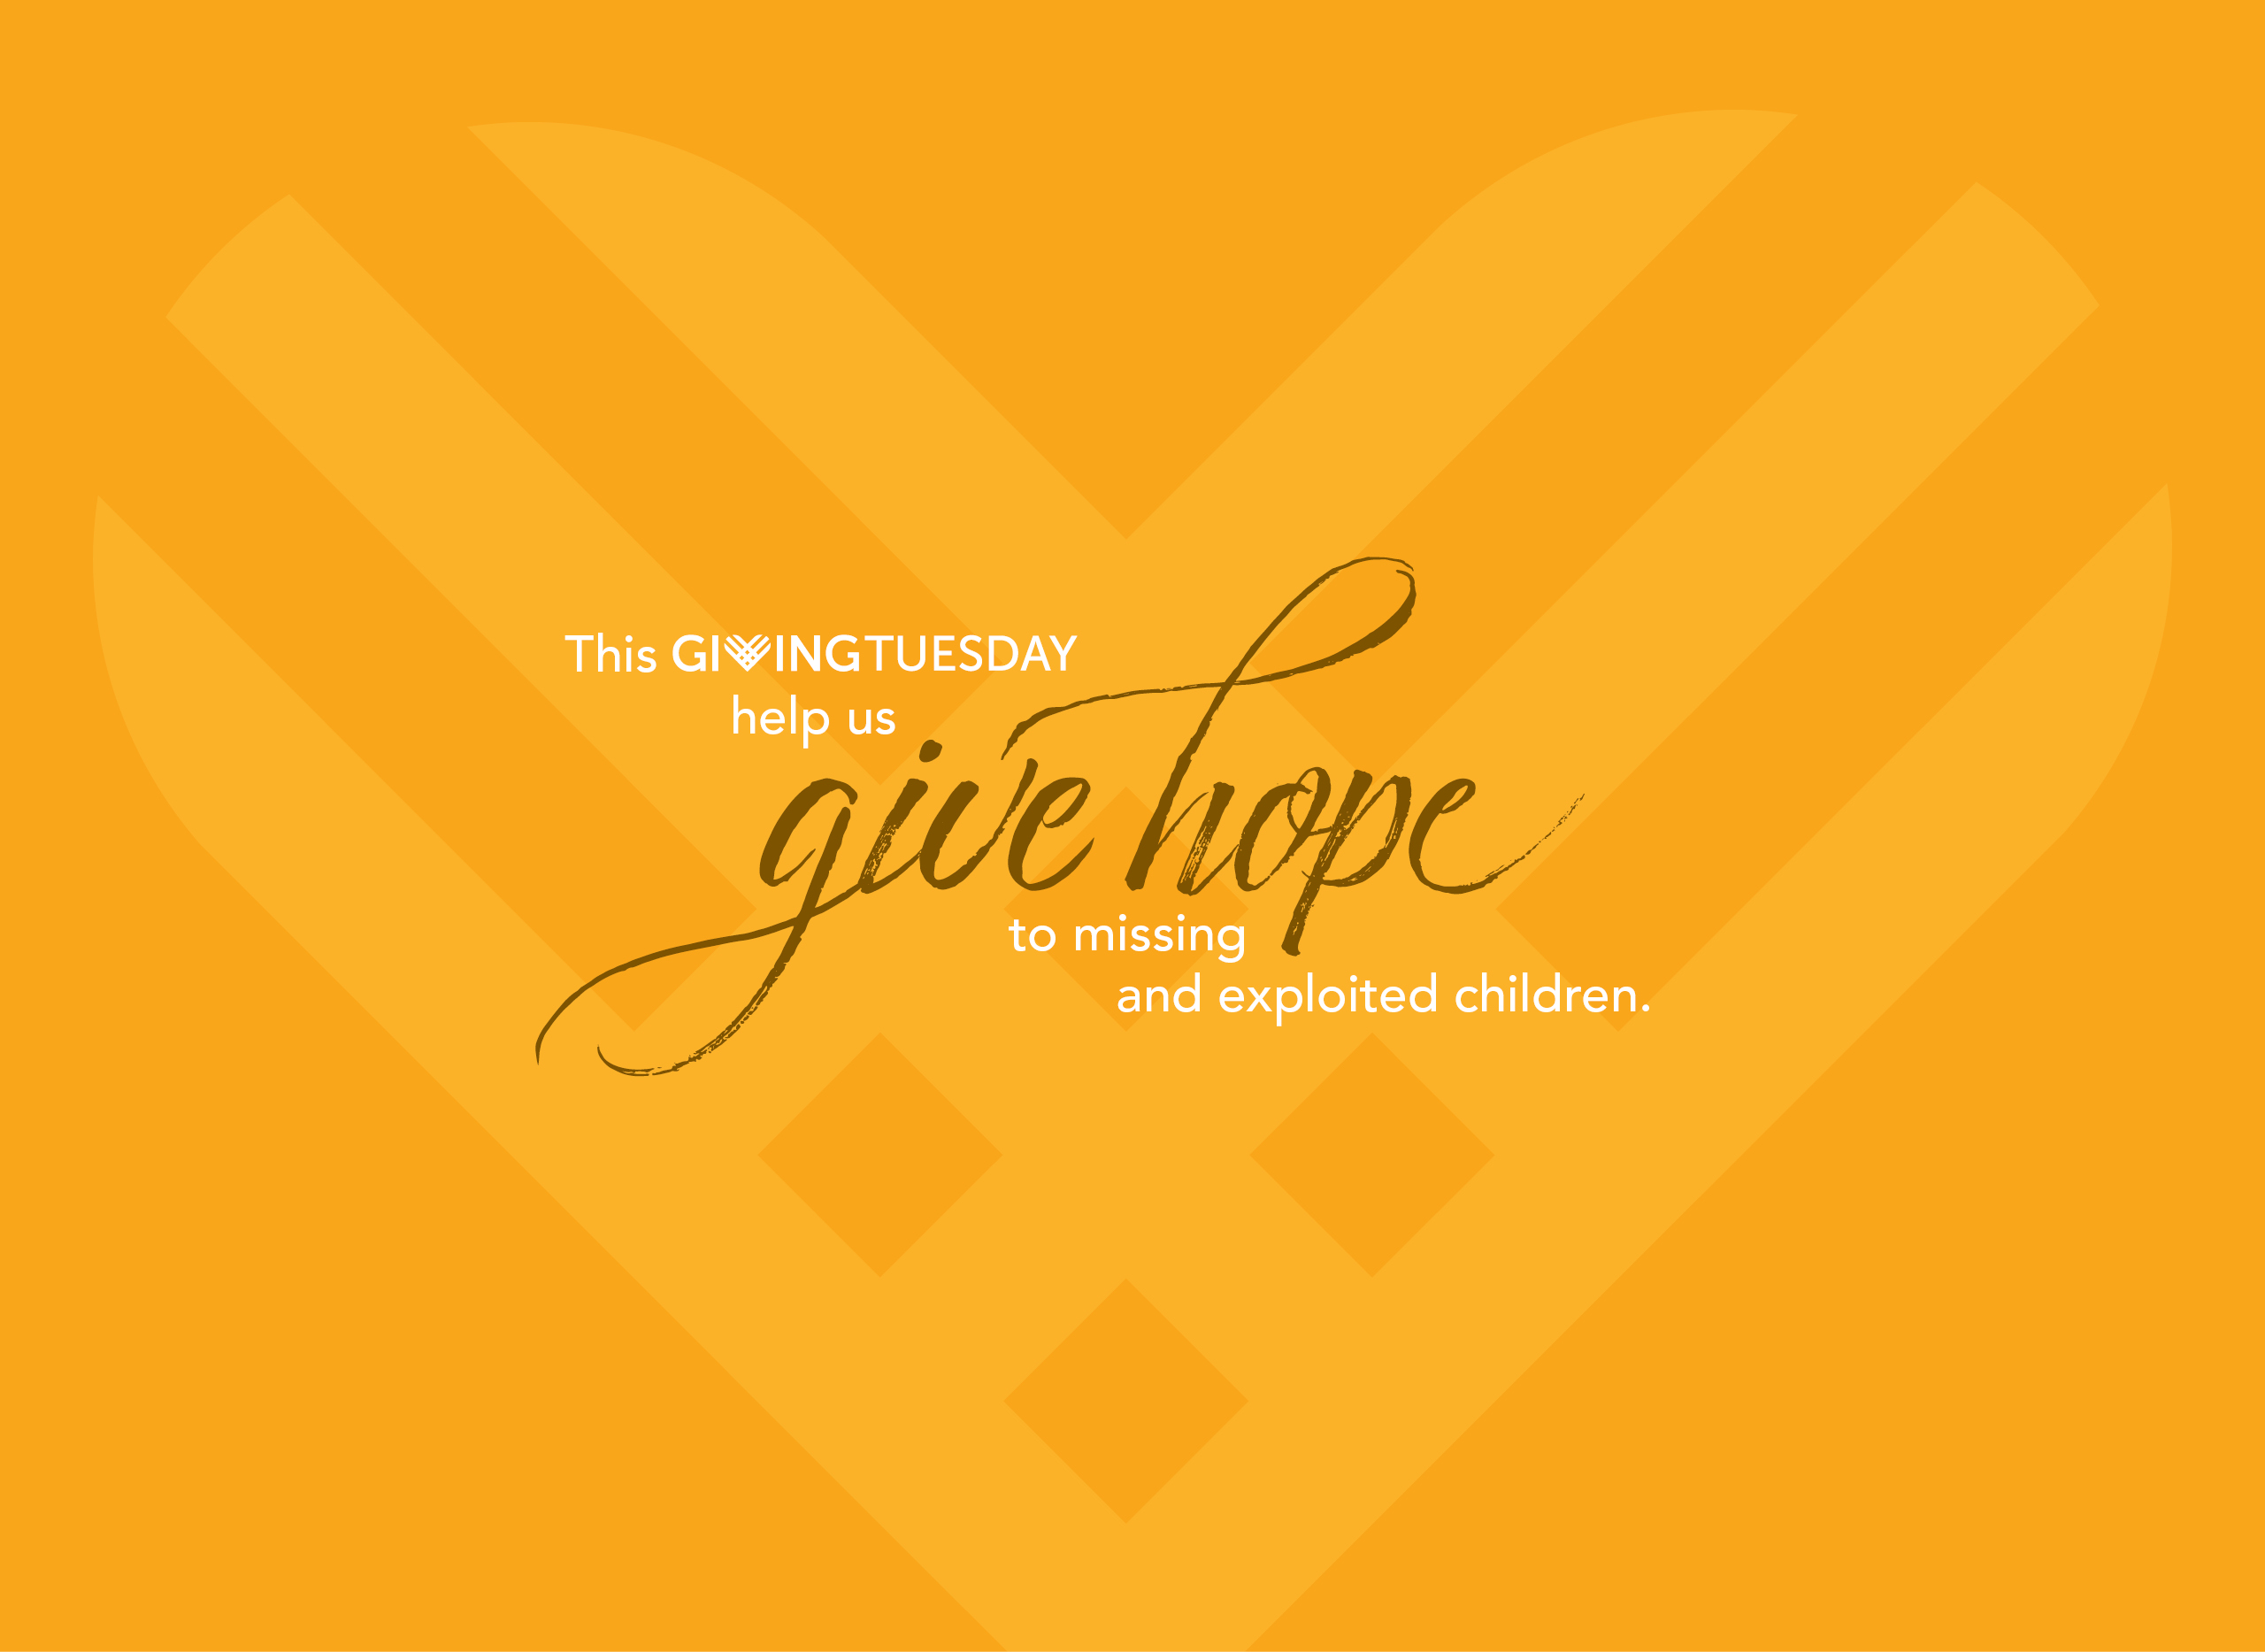 Yellow heart background with "Give Hope" in text